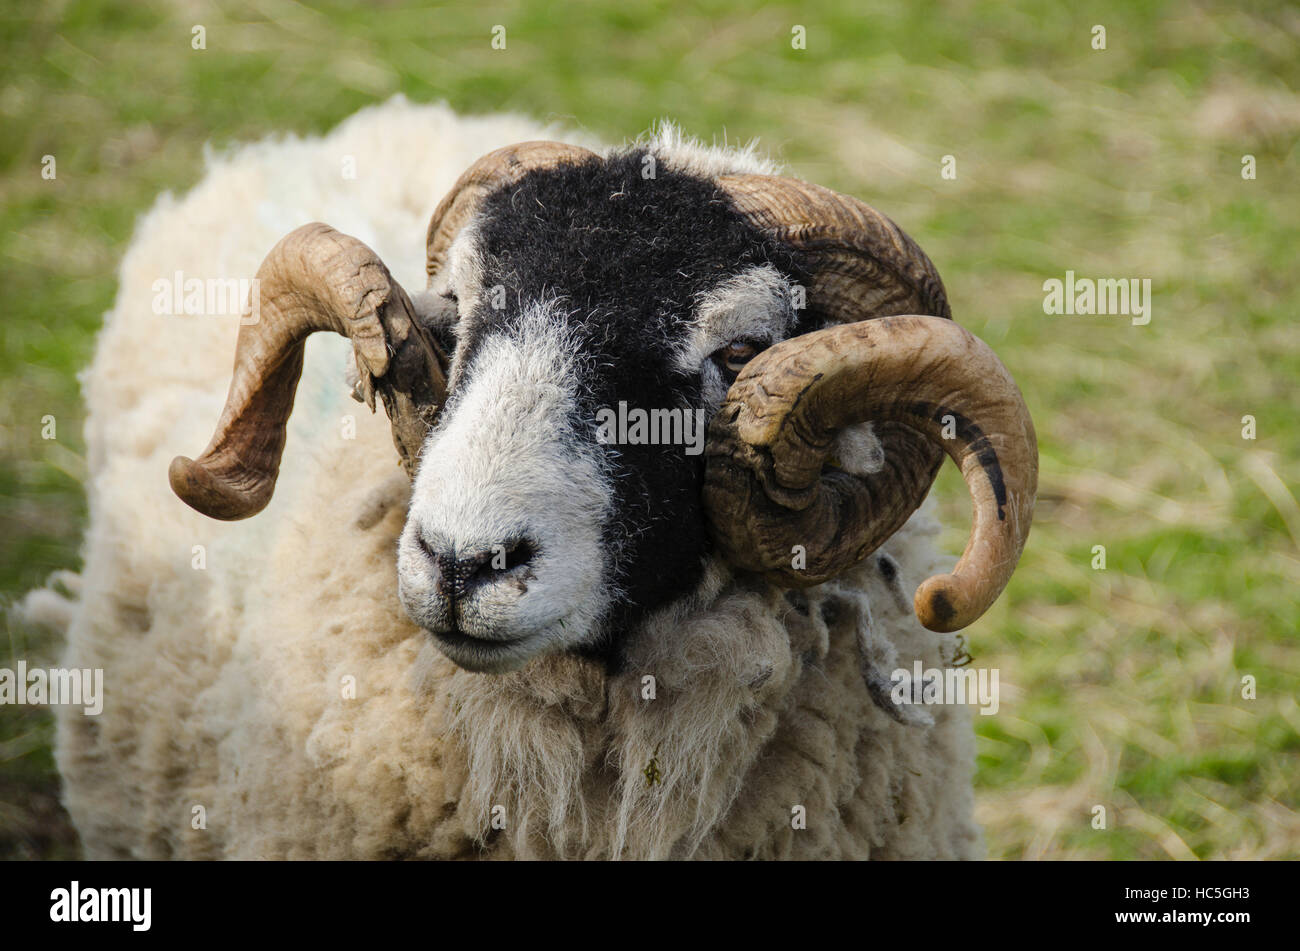 With thick woolly coat & curled horns, adult Swaledale sheep in farm field, is turning to left (head & face close-up) - North Yorkshire England, UK. Stock Photo